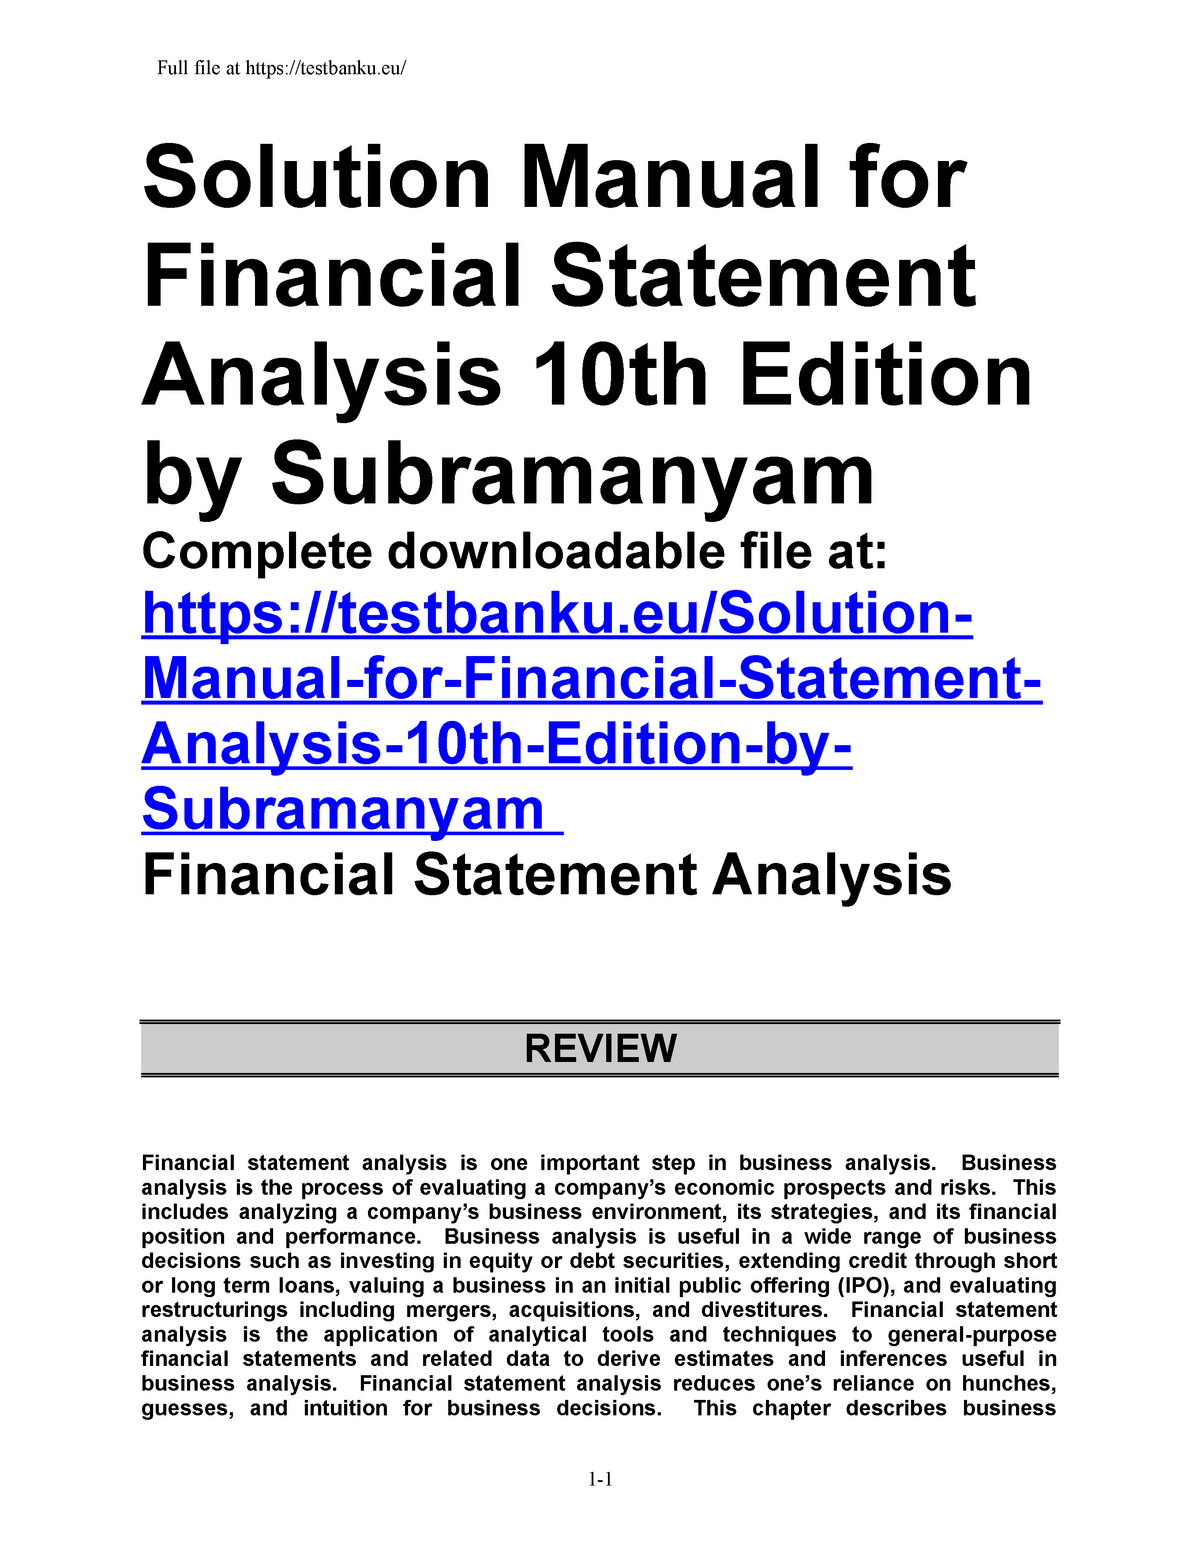 Solution Manual for Financial Statement Analysis 10th Edition by